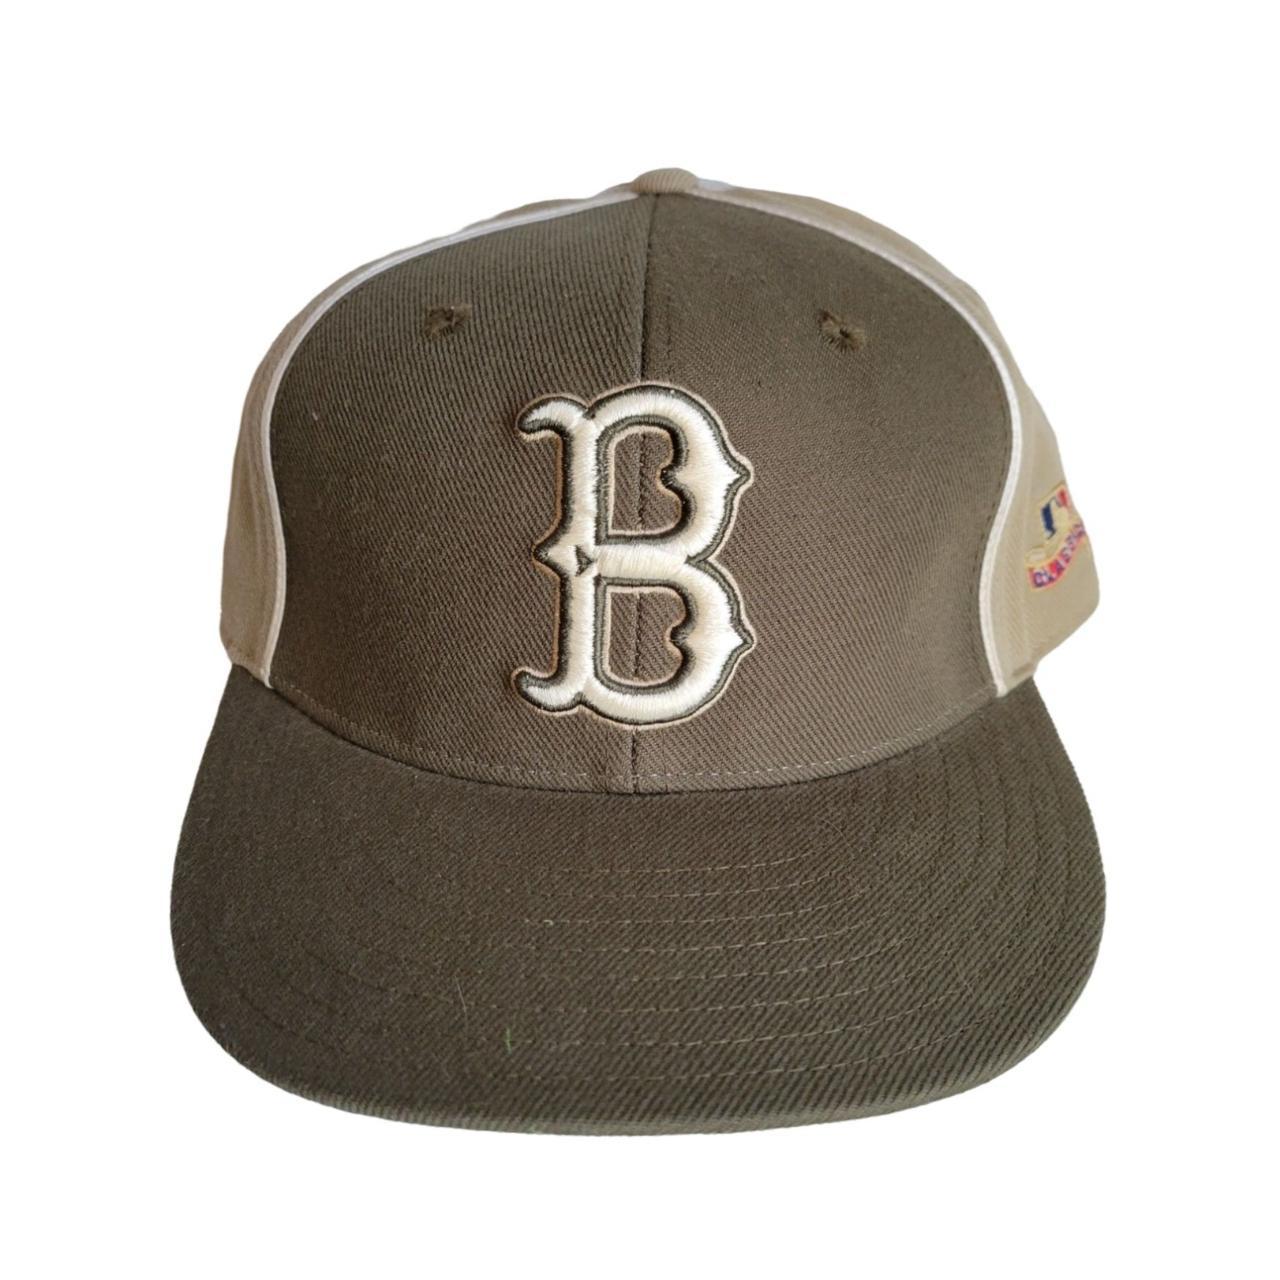 Brooklyn Dodgers fitted cap. Cooperstown Collection - Depop